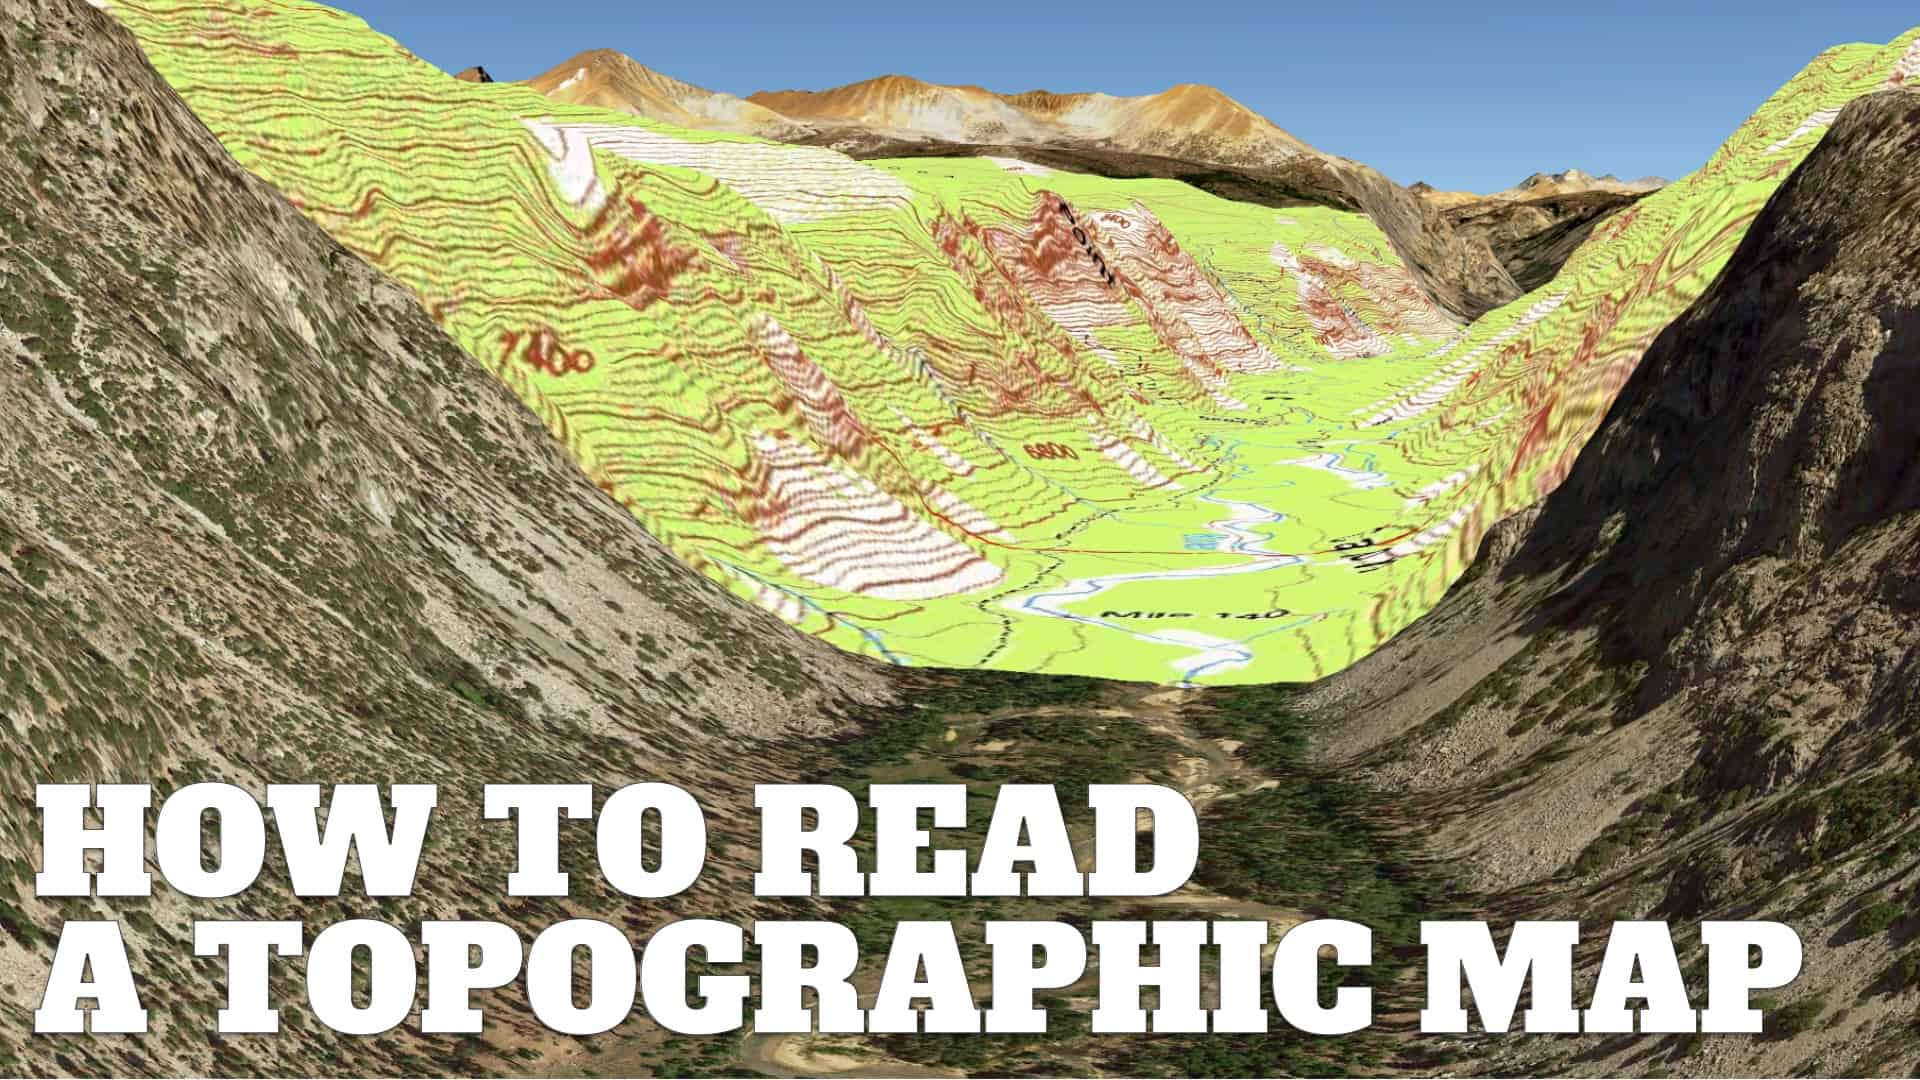 How To Read A Topographic Map Poster 